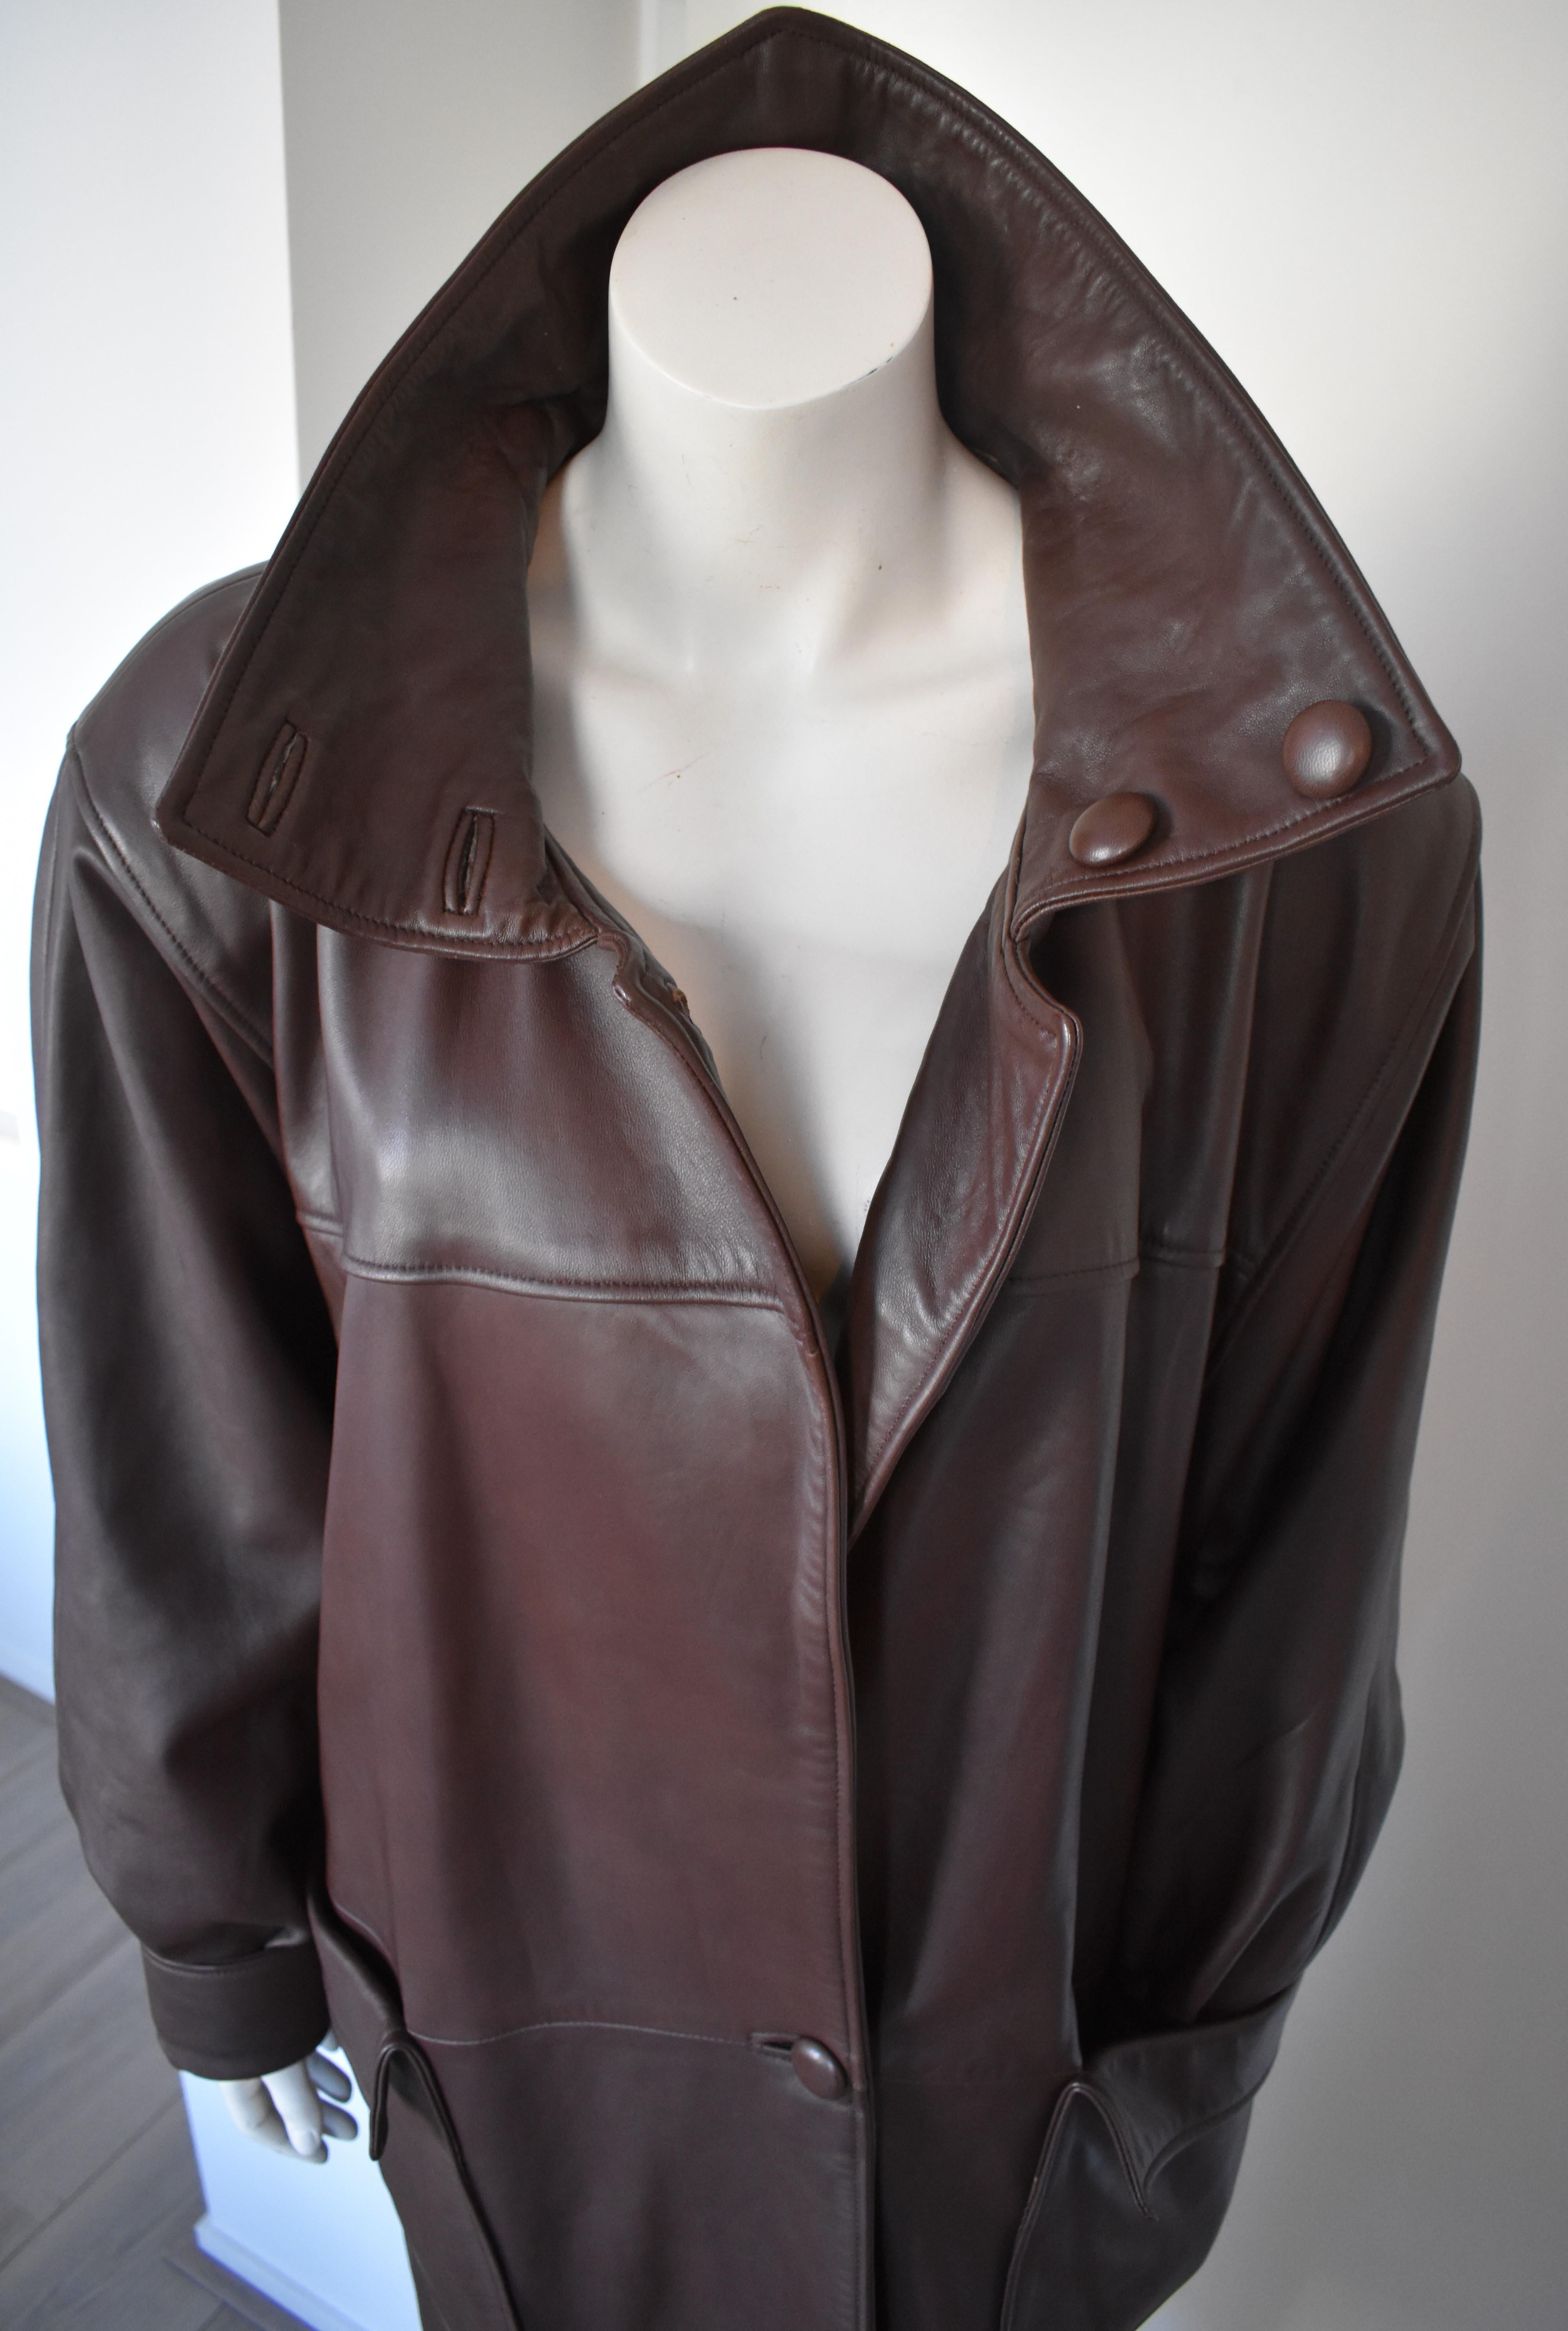 Women's Chocolate Brown Leather Coat by Carven Paris